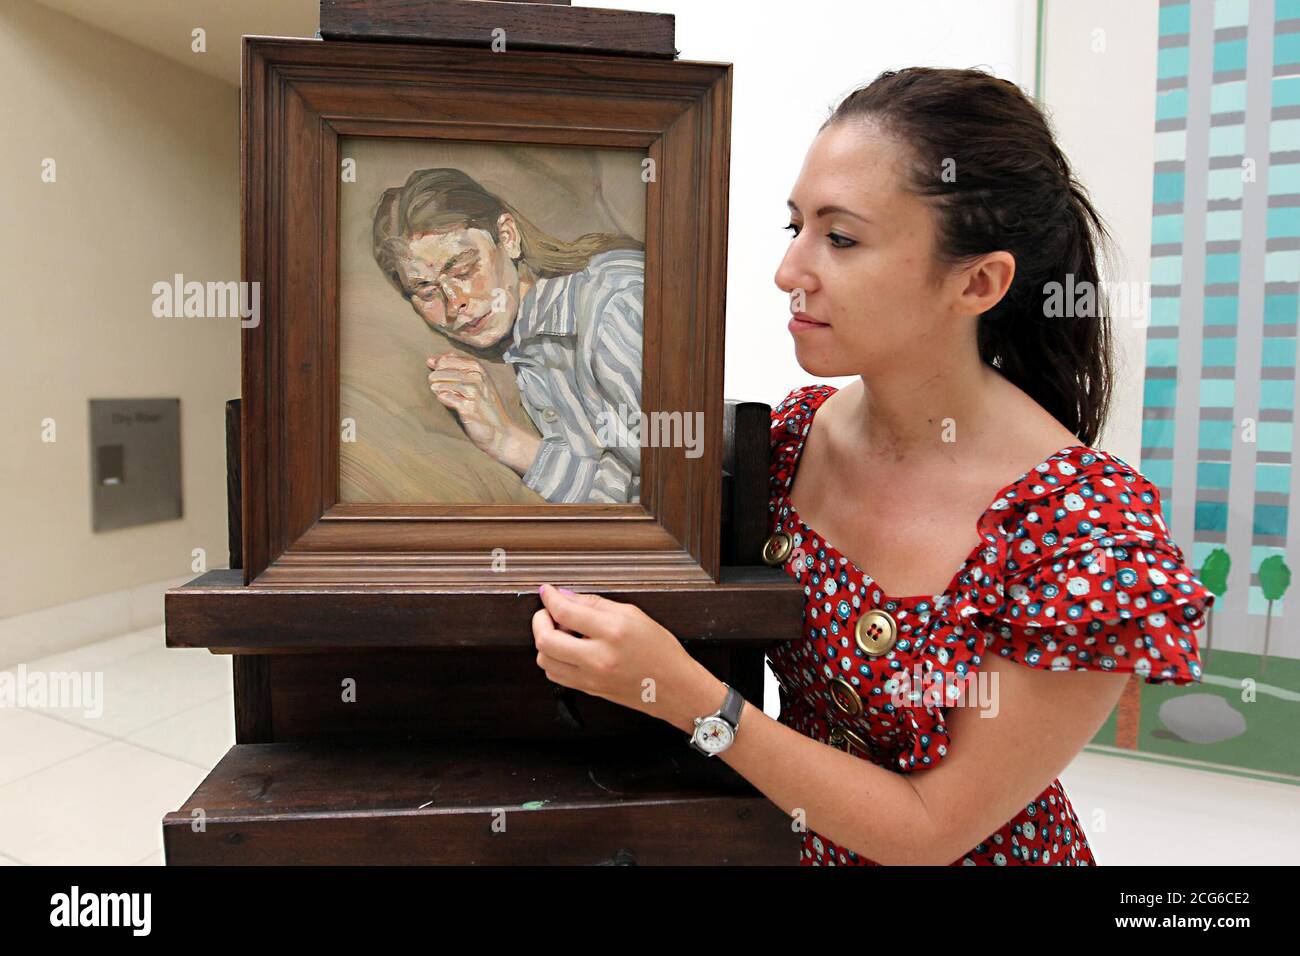 Alexandra Jacobs at Tate Britain, London, looking at the Girl In A Striped Nightdress by Lucian Freud, one of the nine works of art presented to the Tate by philanthropists Mercedes and Ian Stoutzker. Stock Photo